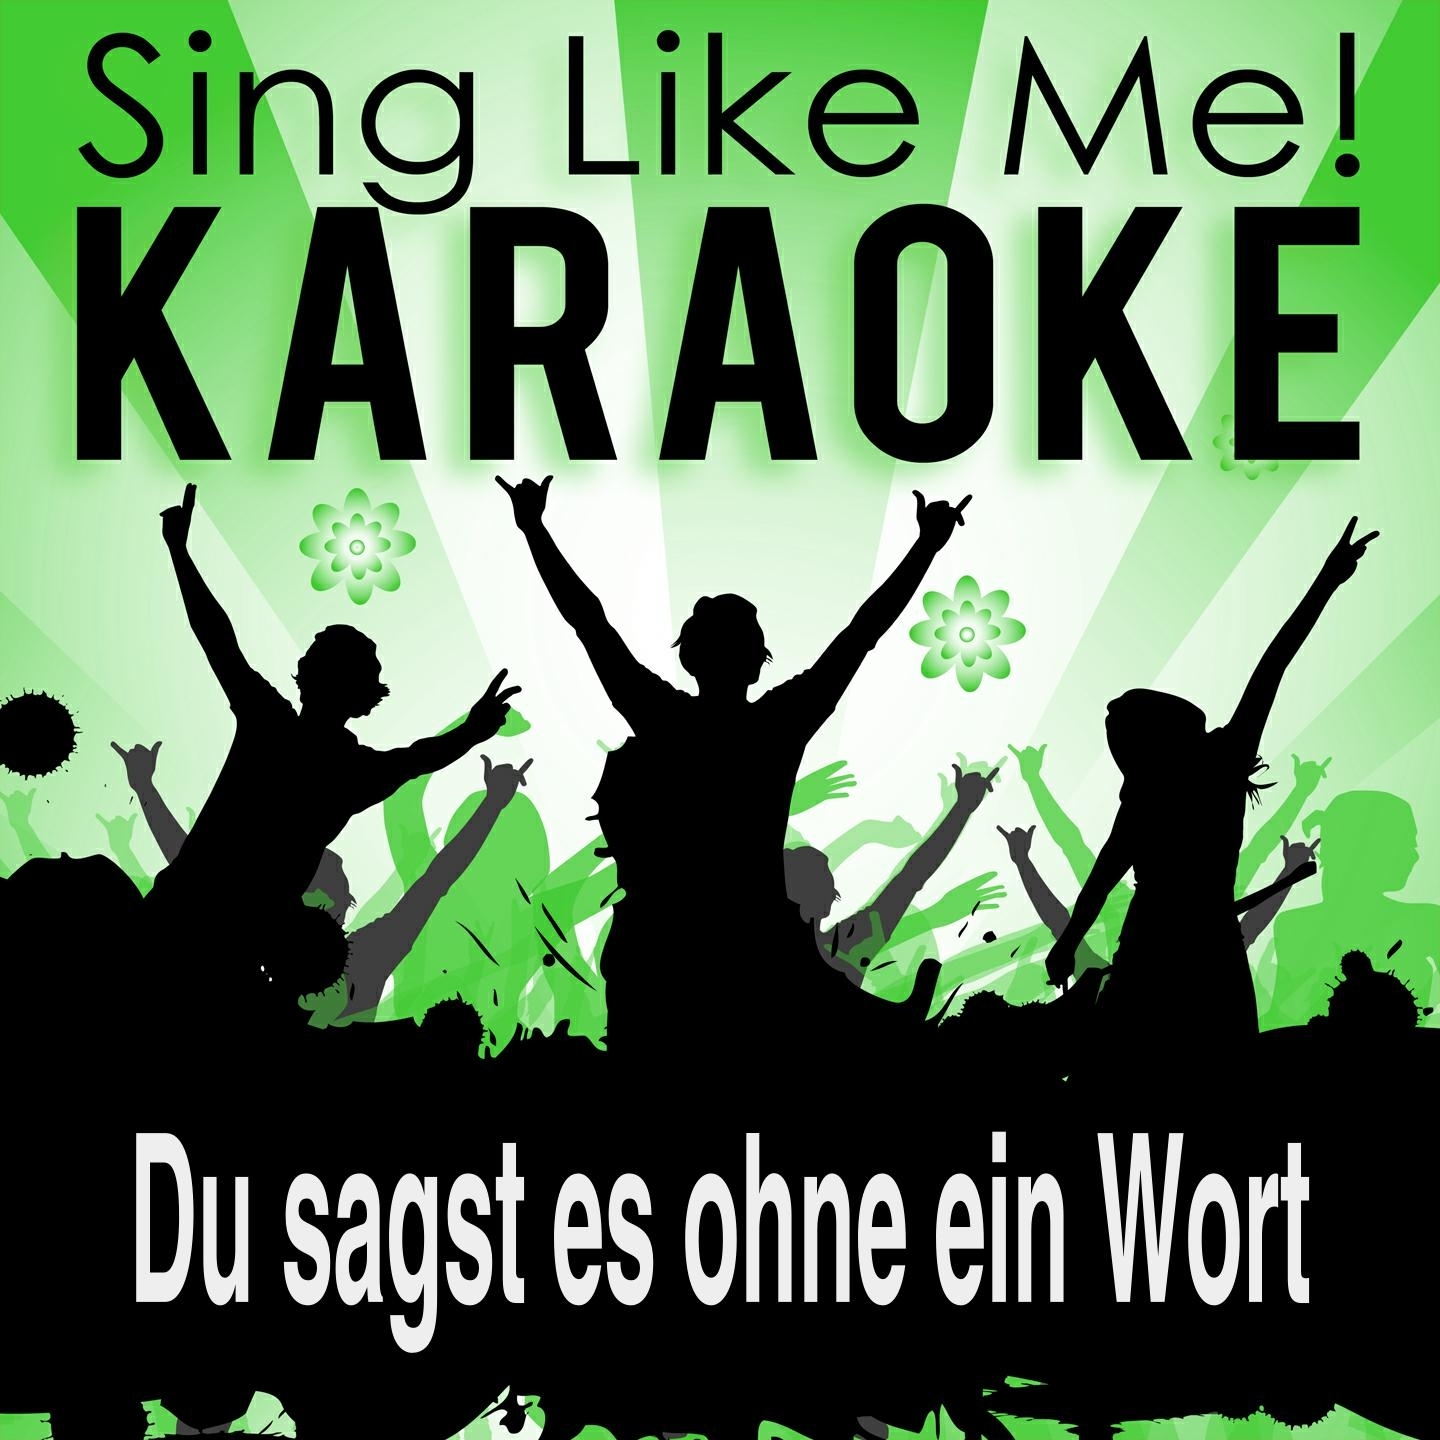 Du sagst es ohne ein Wort (Karaoke Version with Guide Melody) (Originally Performed By Claudia Jung)